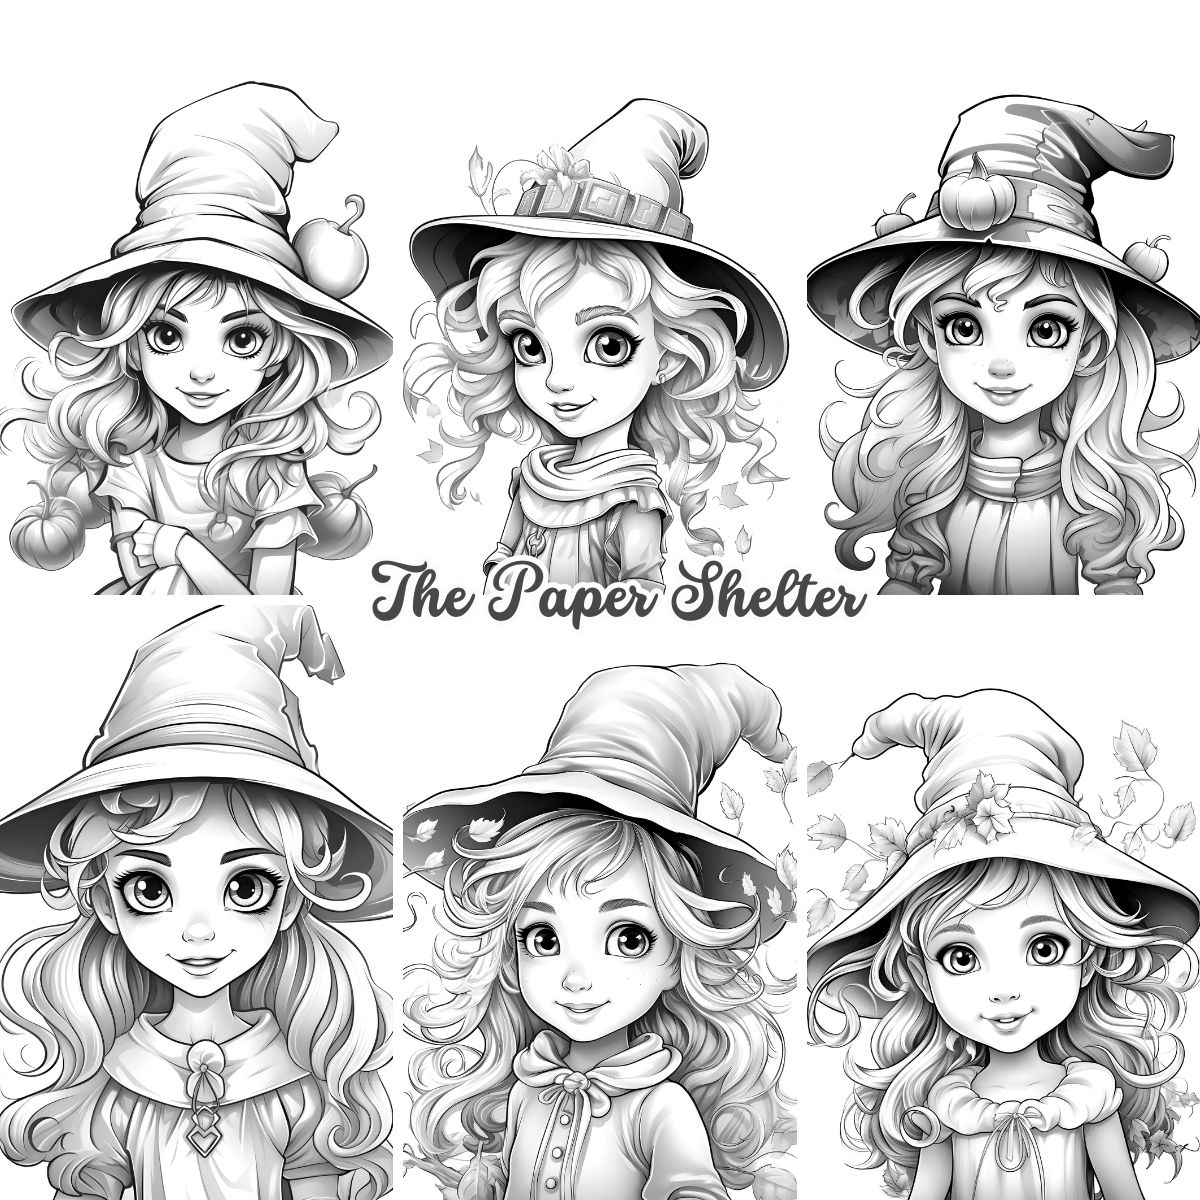 Boo-tiful Little Witches - Digital Coloring Book